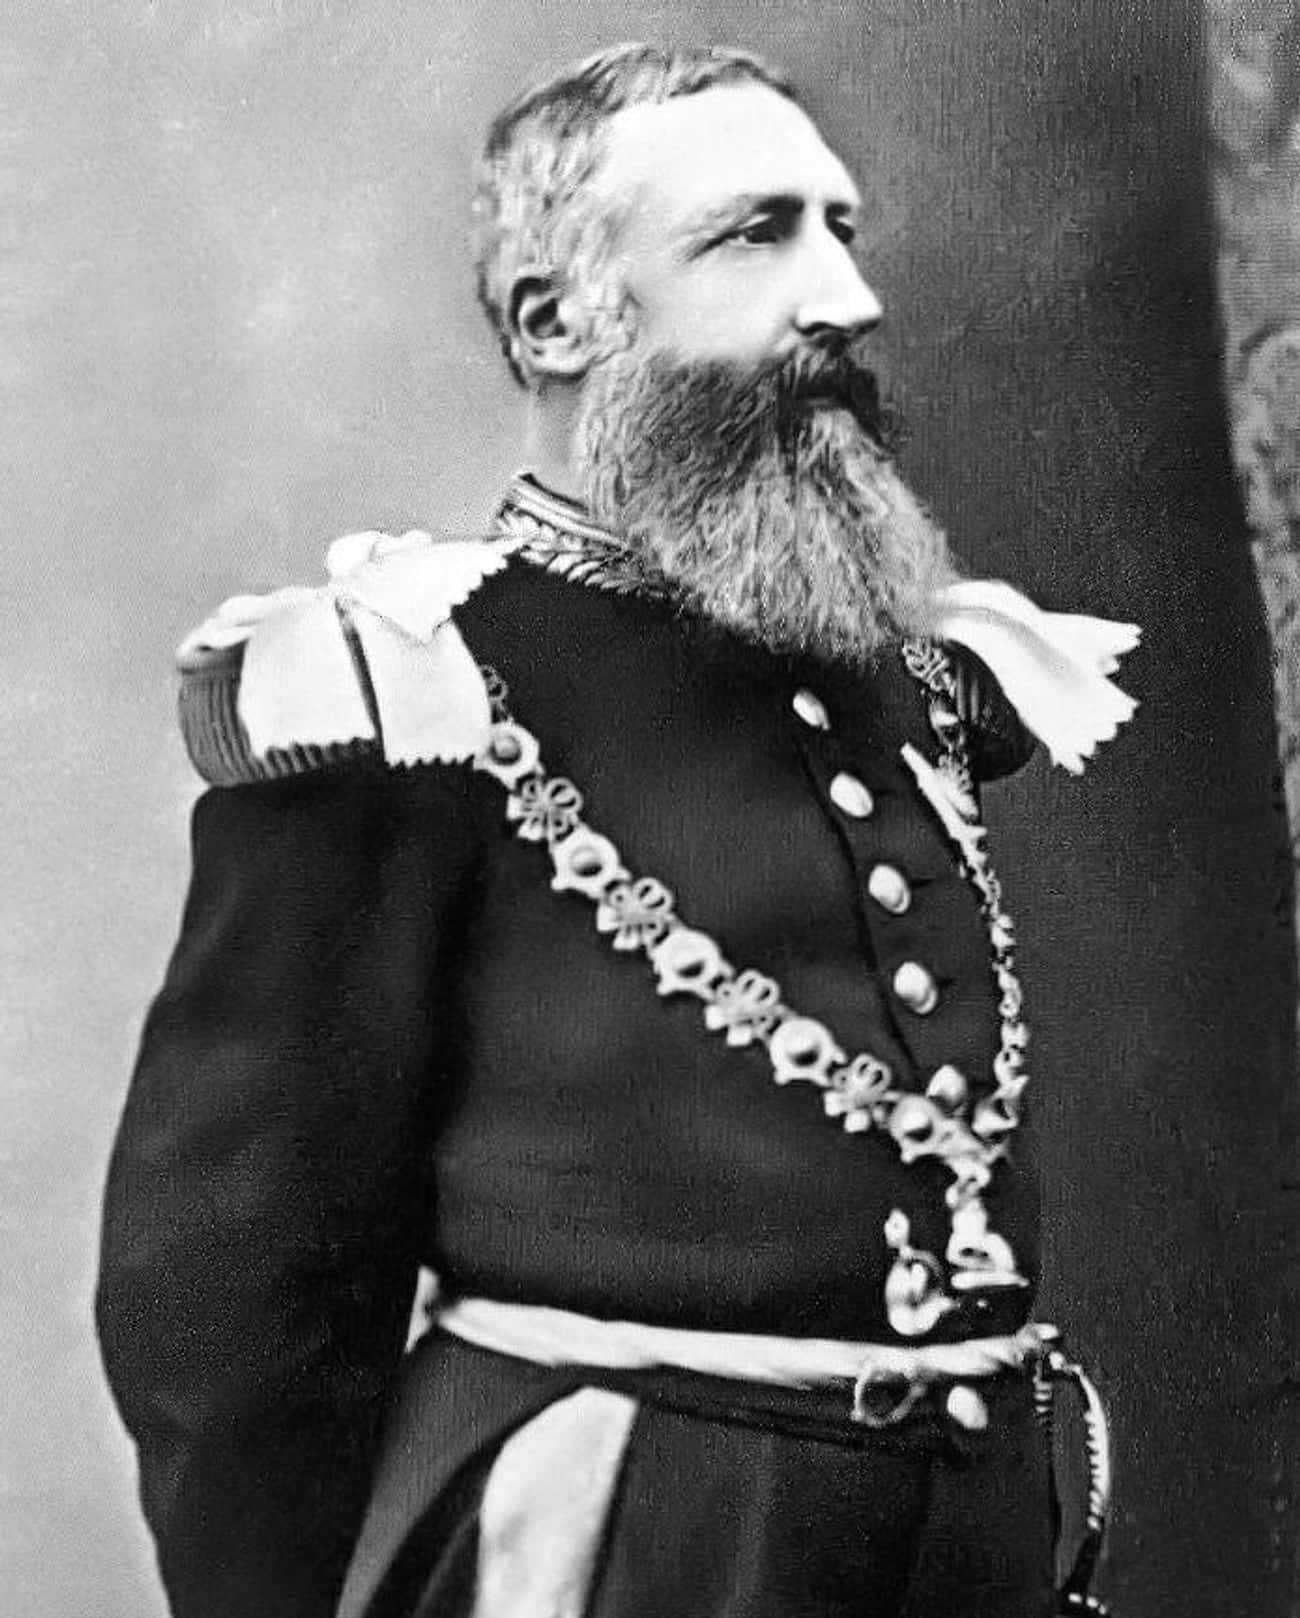 Leopold II Brutalized The Congo And Never Faced Justice